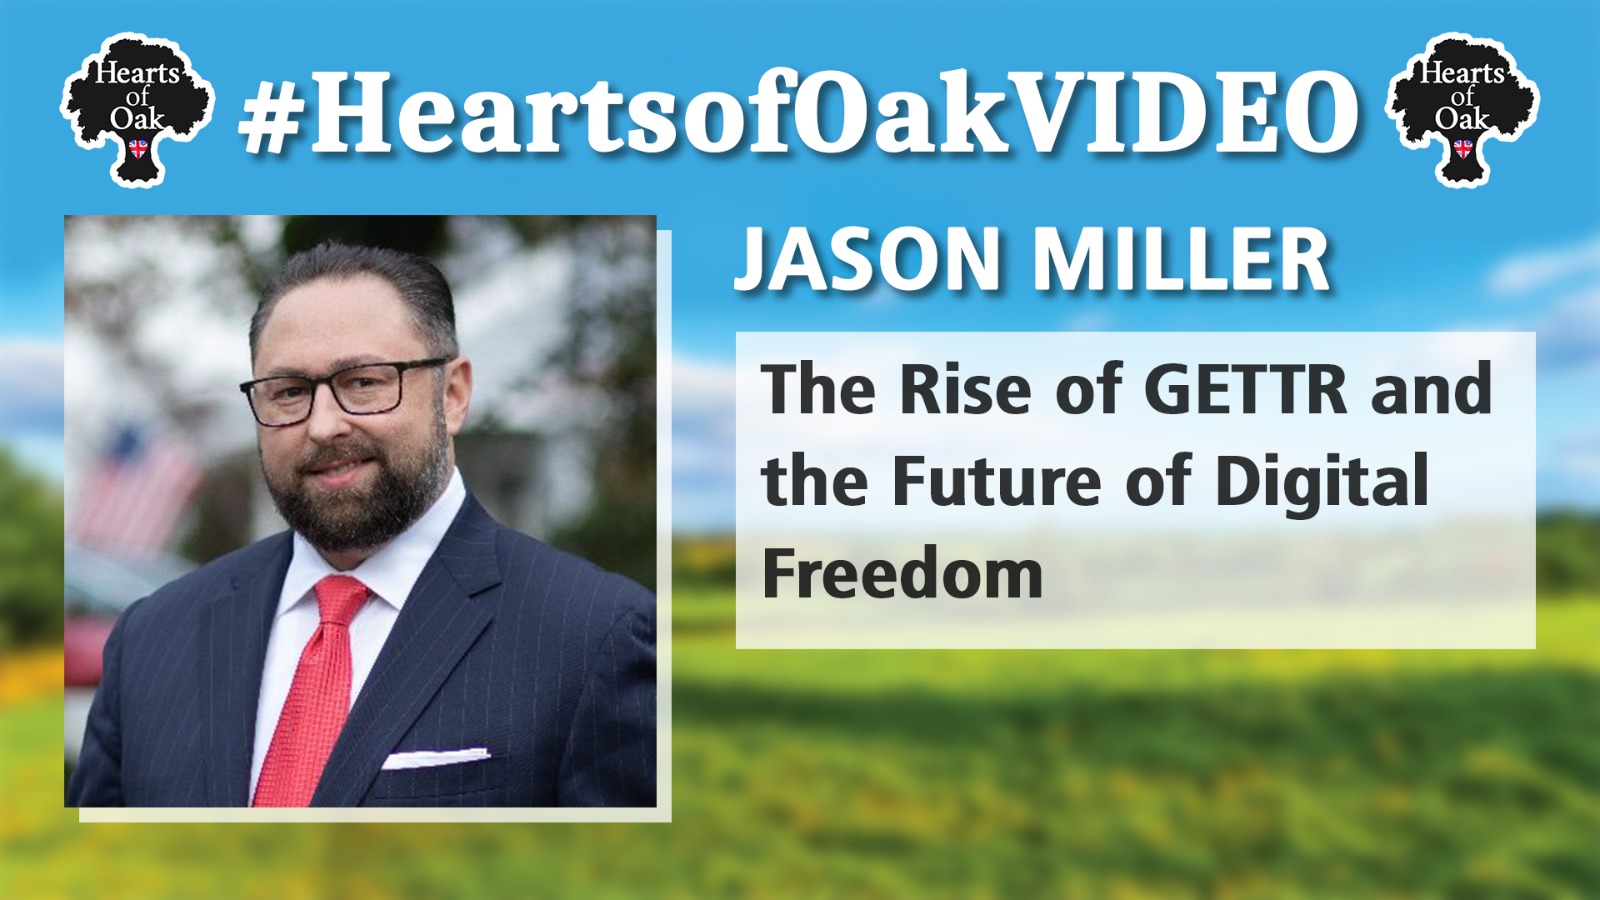 Jason Miller: The Rise of GETTR and the Future of Digital Freedom